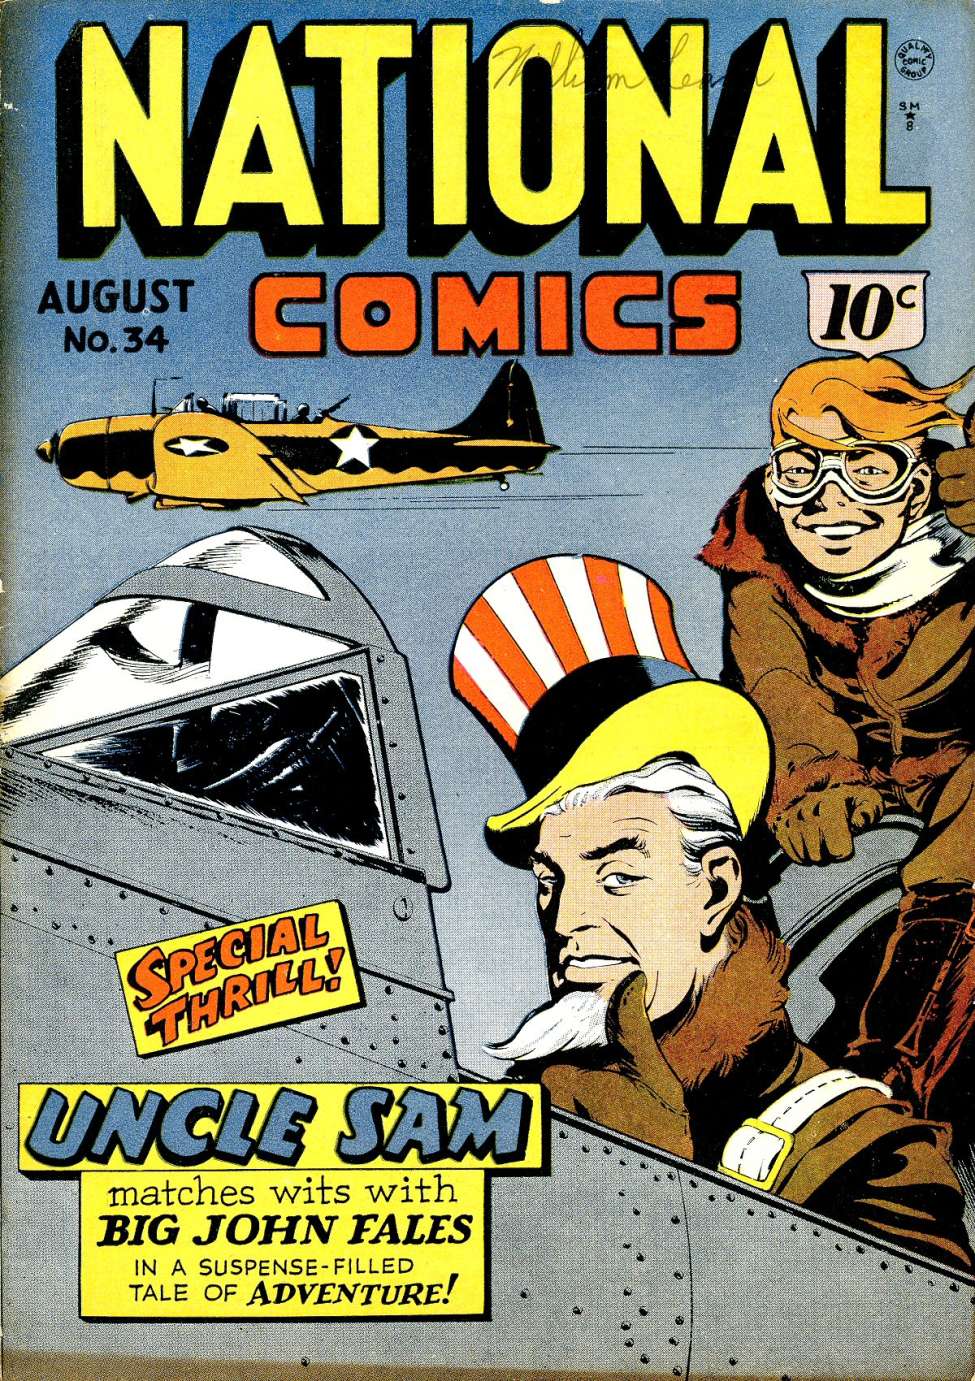 Book Cover For National Comics 34 - Version 2